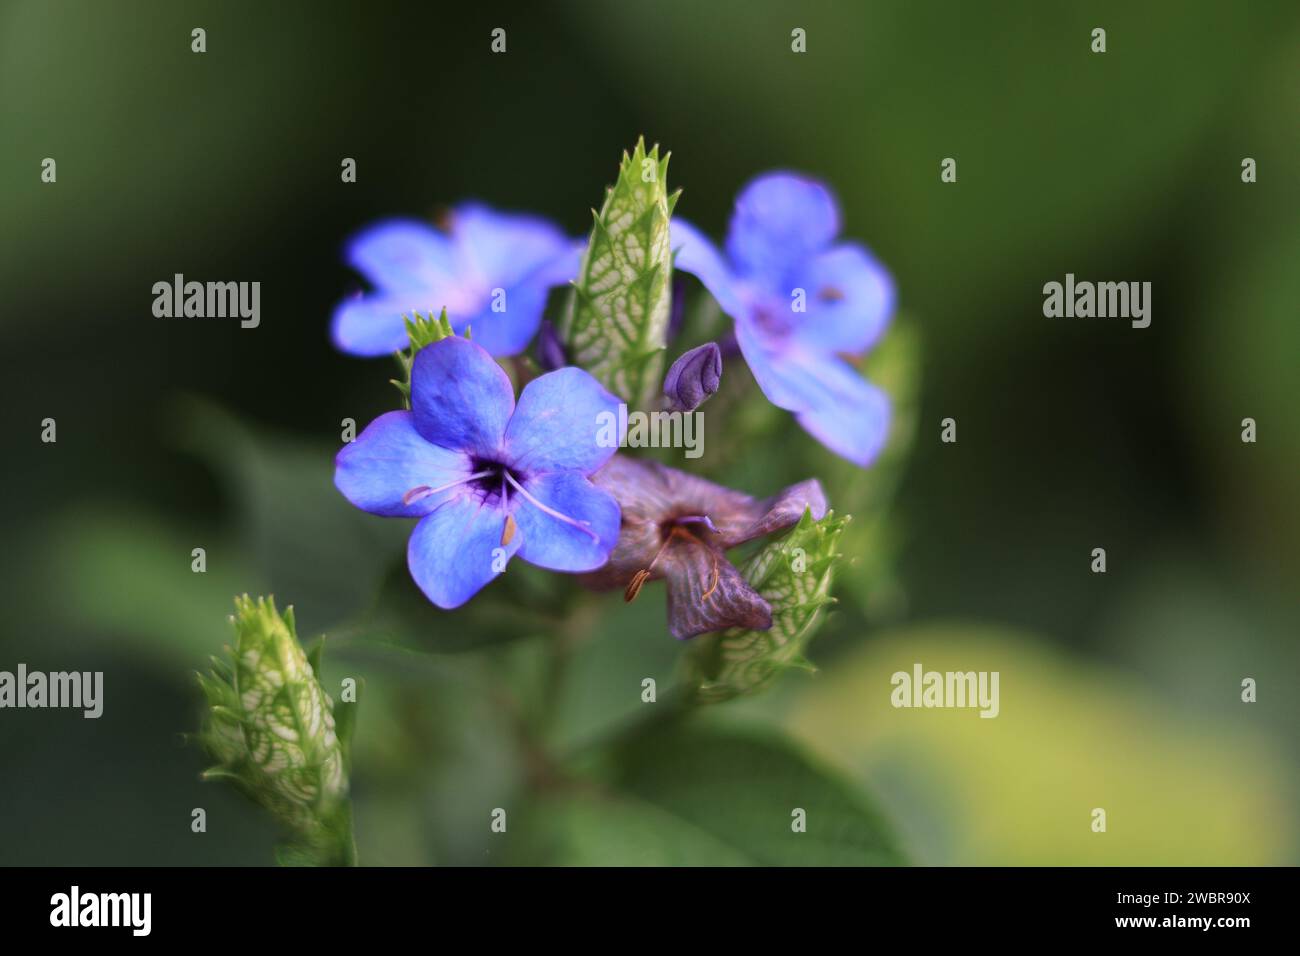 A close-up of vibrant Barleria flowers against a soft, blurred green backdrop Stock Photo